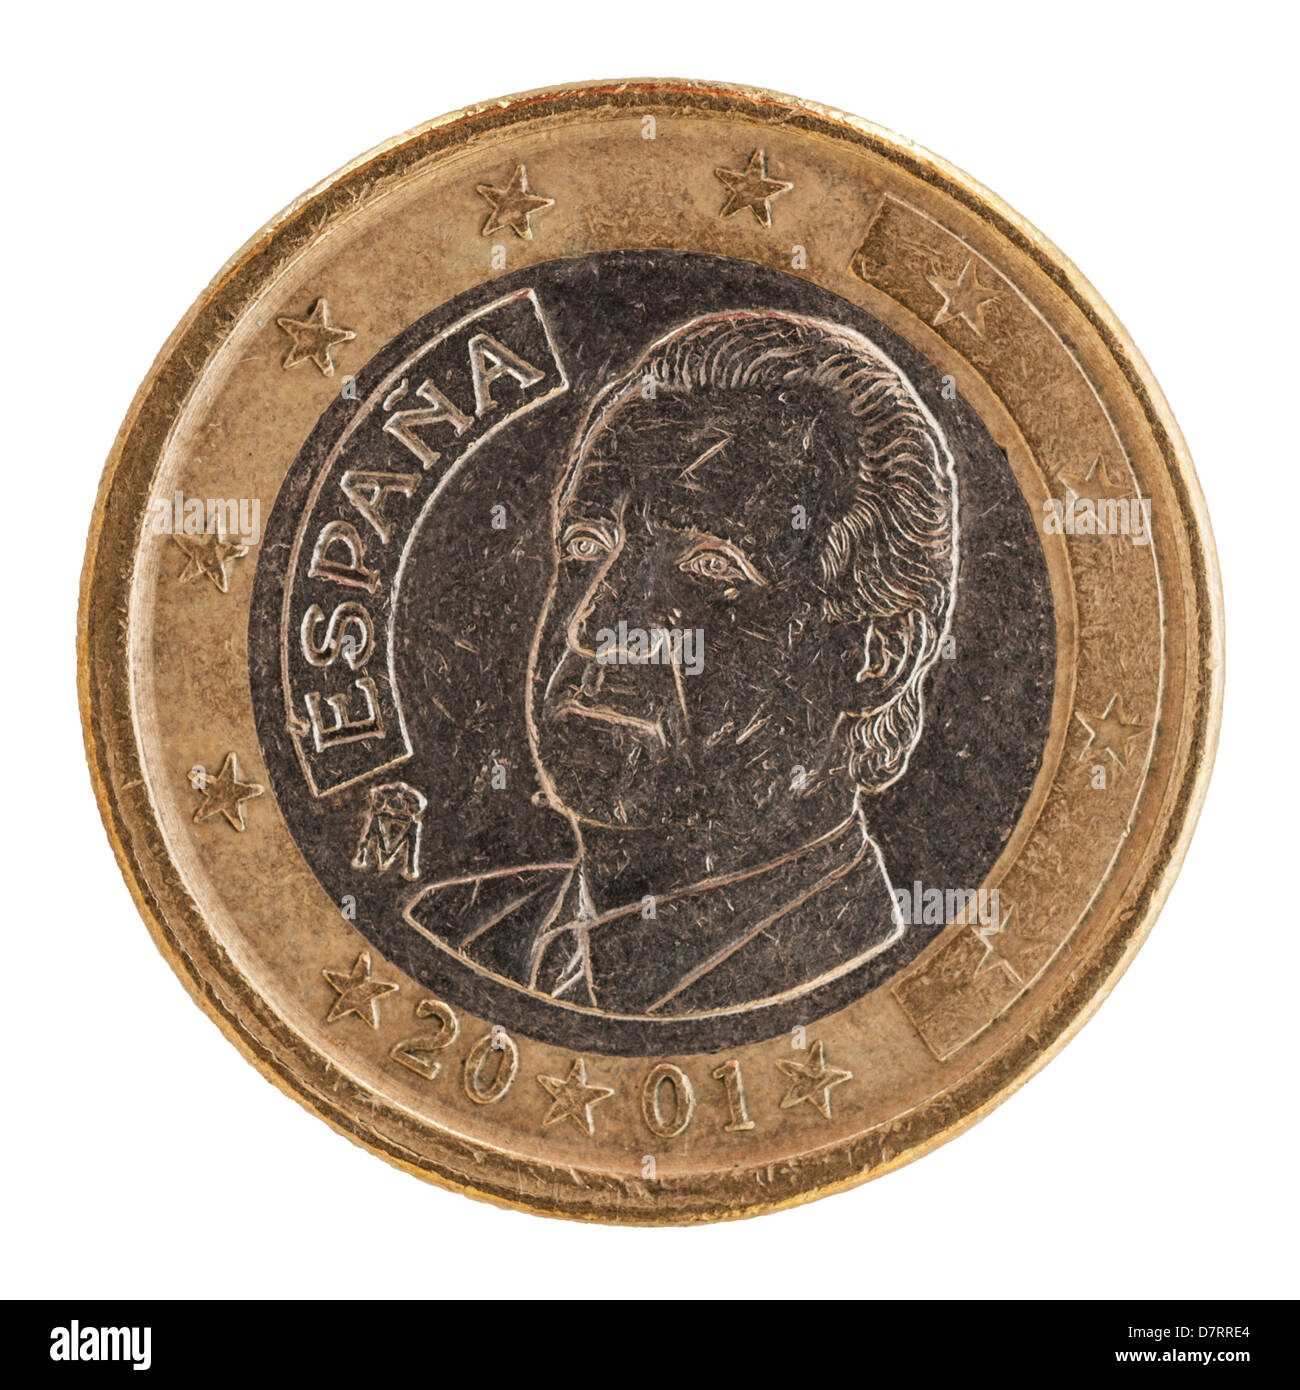 A Spanish 1 euro coin on a white background Stock Photo